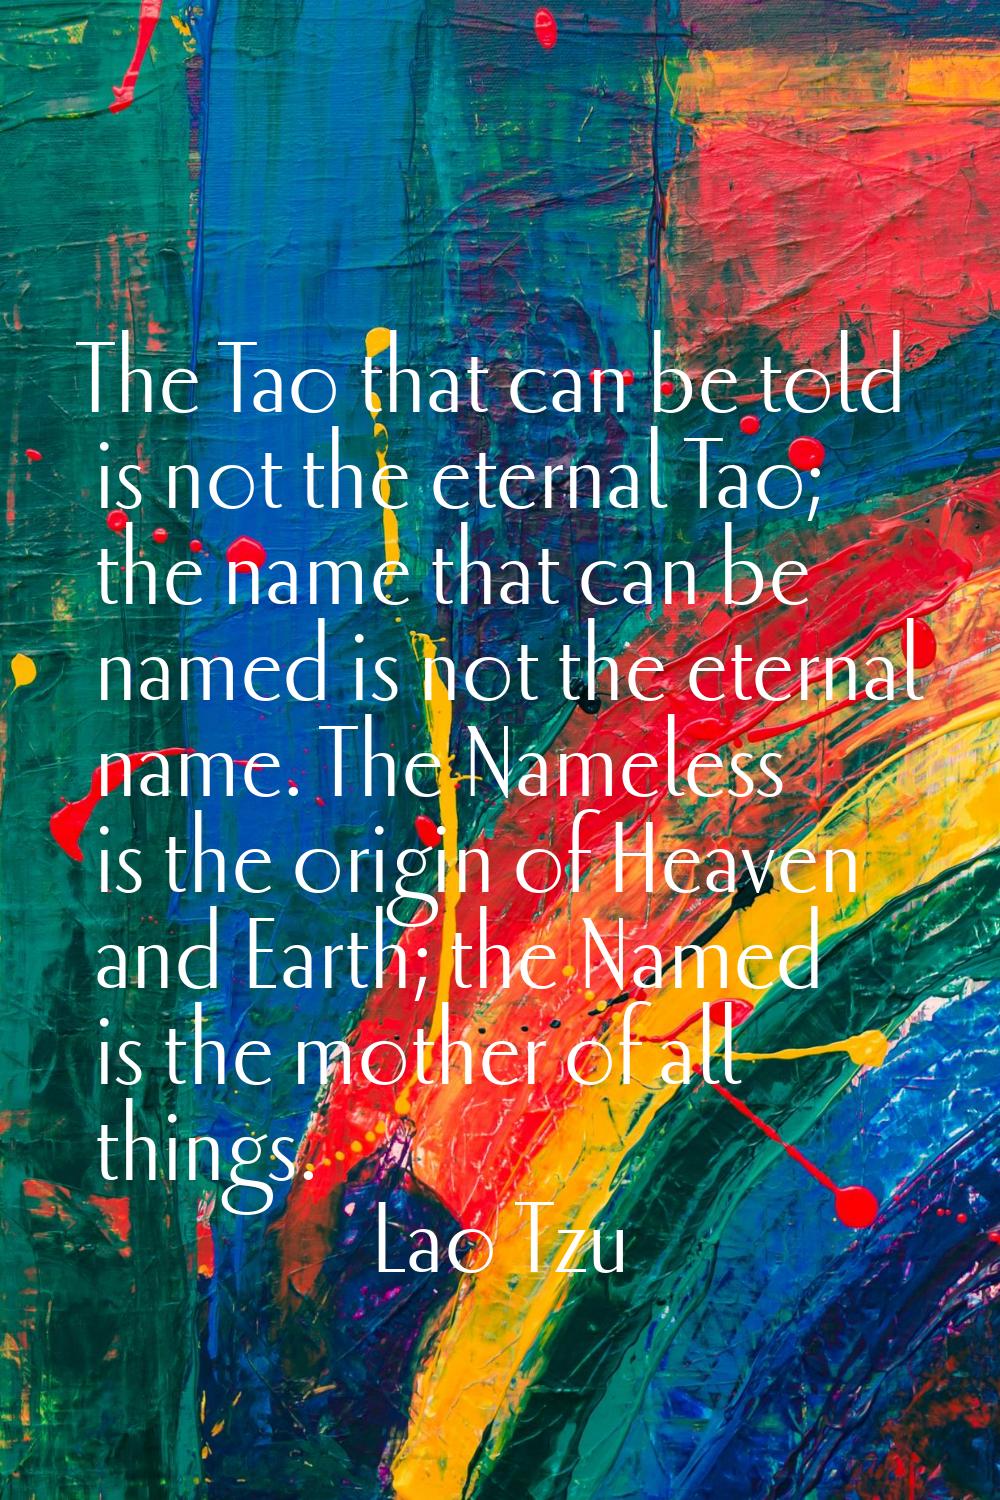 The Tao that can be told is not the eternal Tao; the name that can be named is not the eternal name